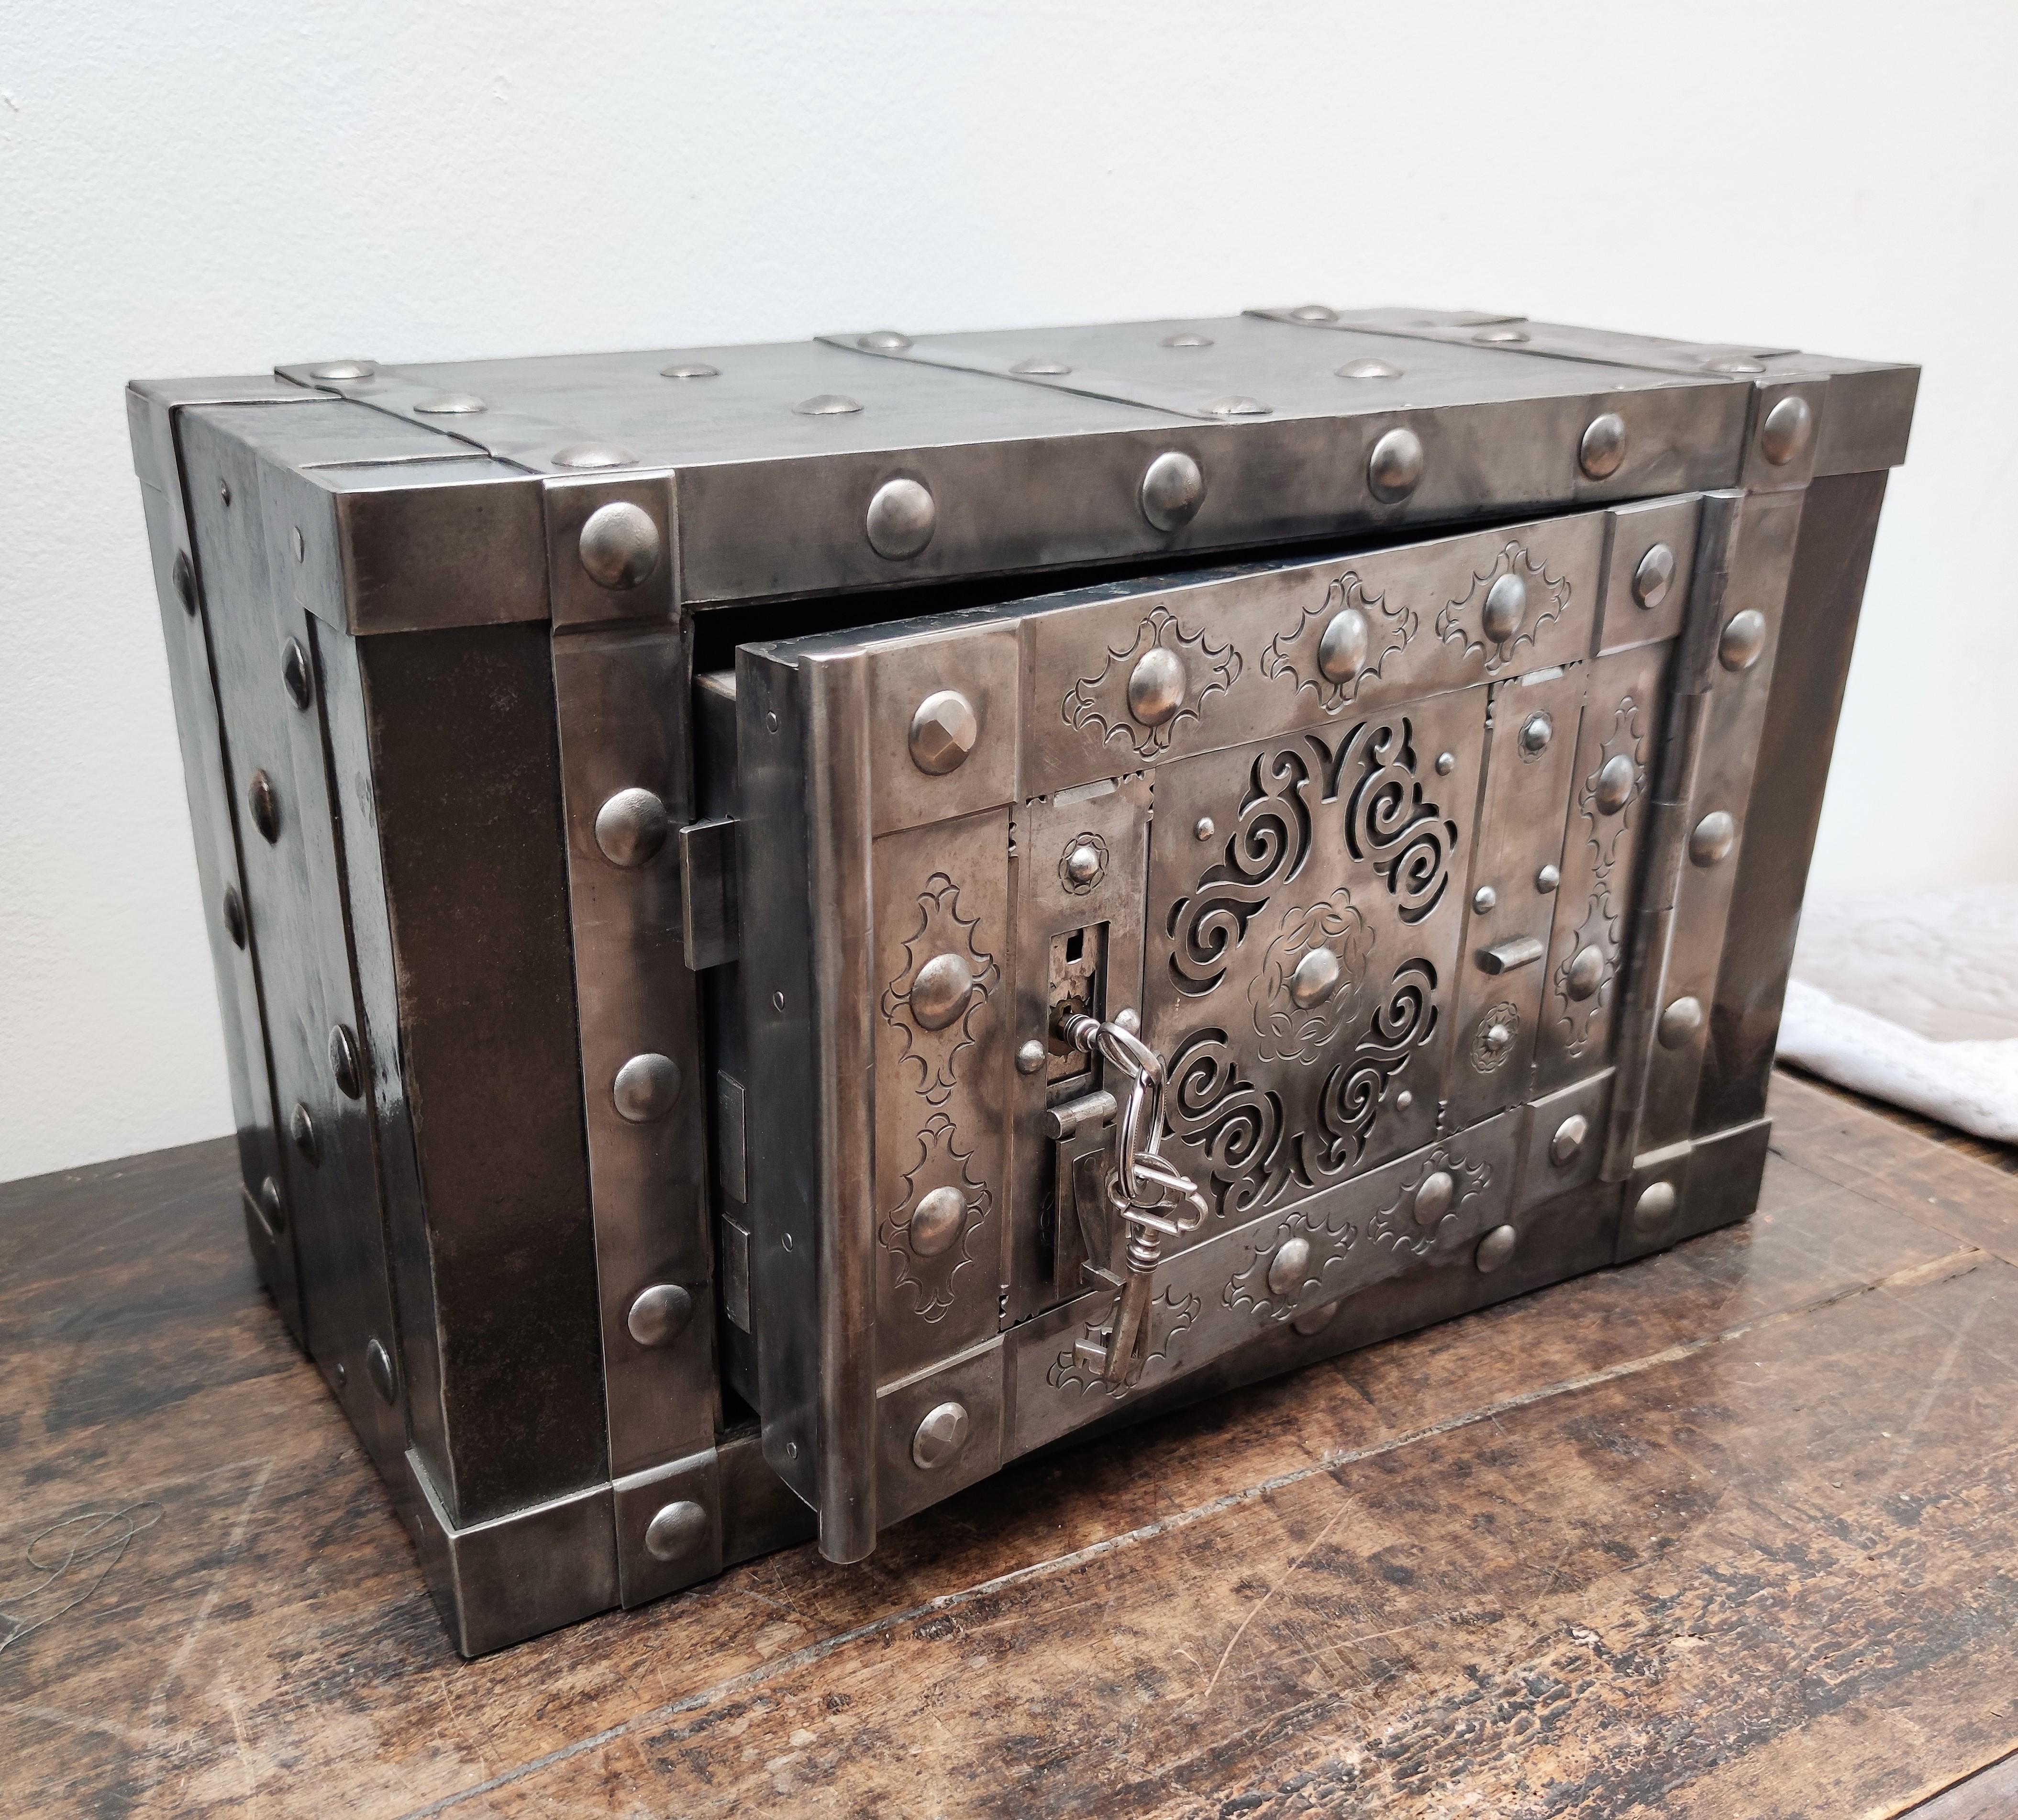 Northern Italian antique hobnail safe, dated circa 1840-1850, found in the Piedmont region. This beautiful collector piece has a great metal color with patina of time and amazingly rich and beautiful burin incisions, a typical handmade technique of